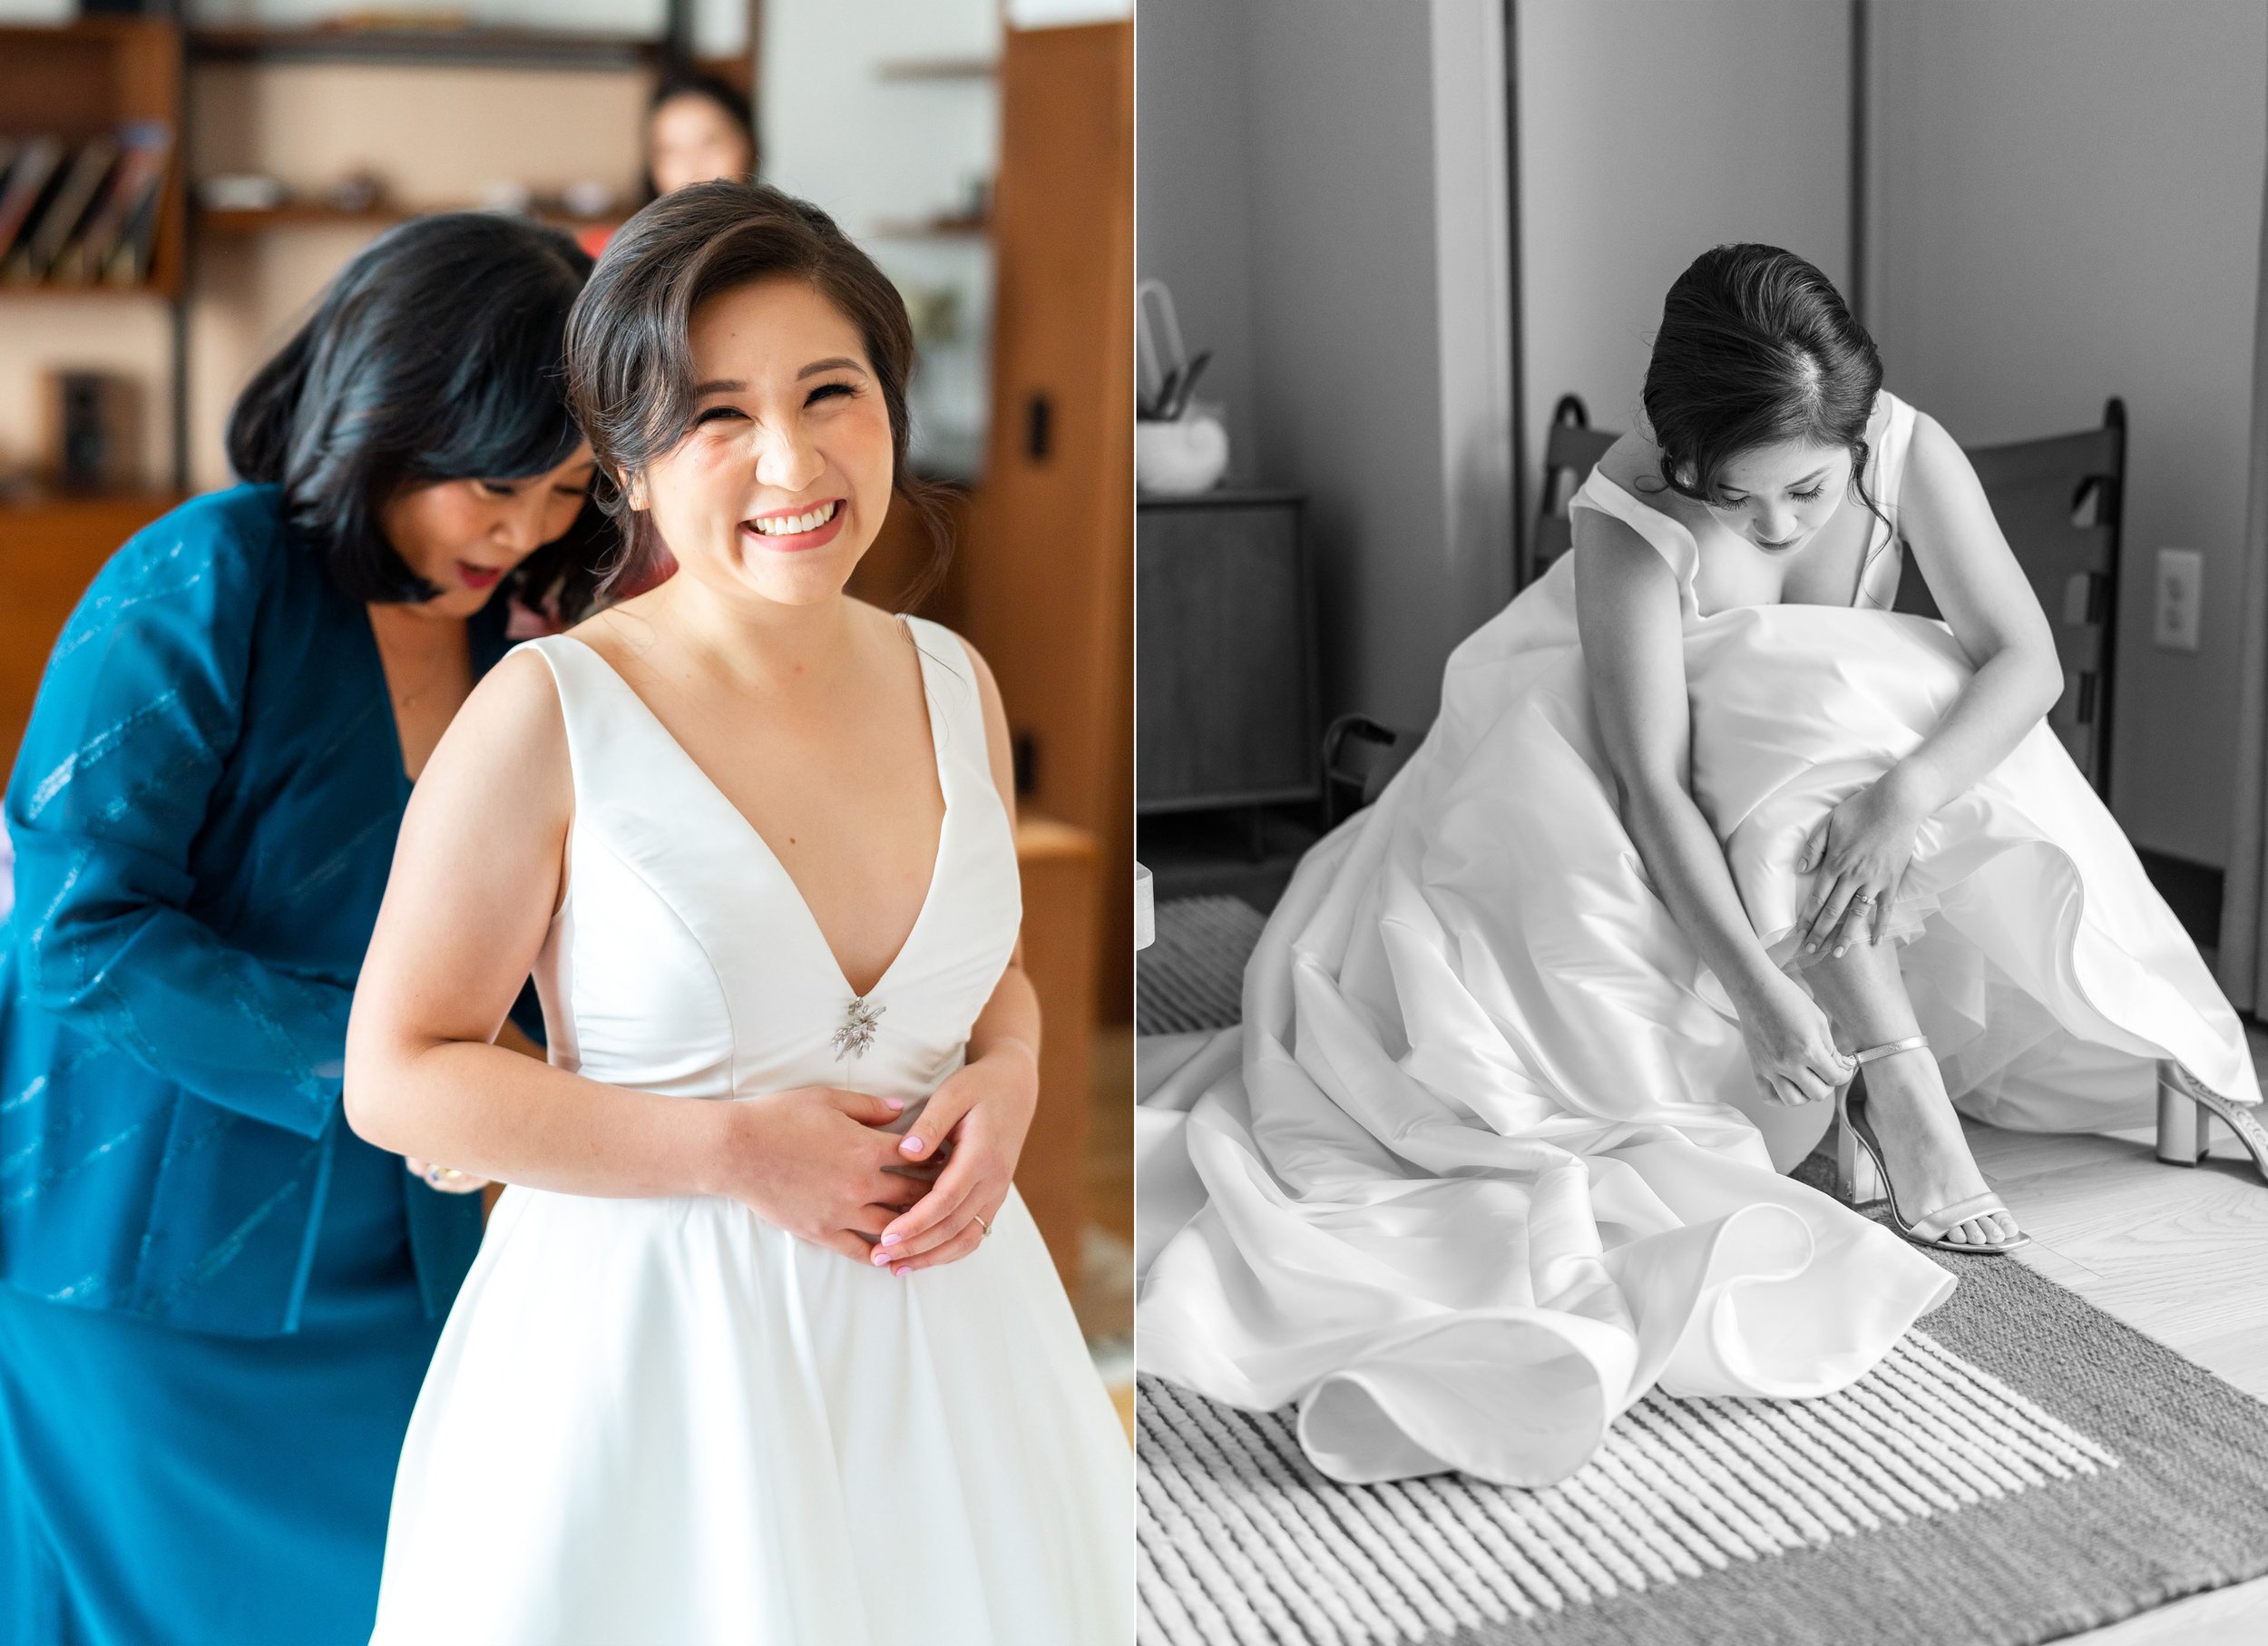 Classic photos of bride putting on shoes in wedding gown black and white images